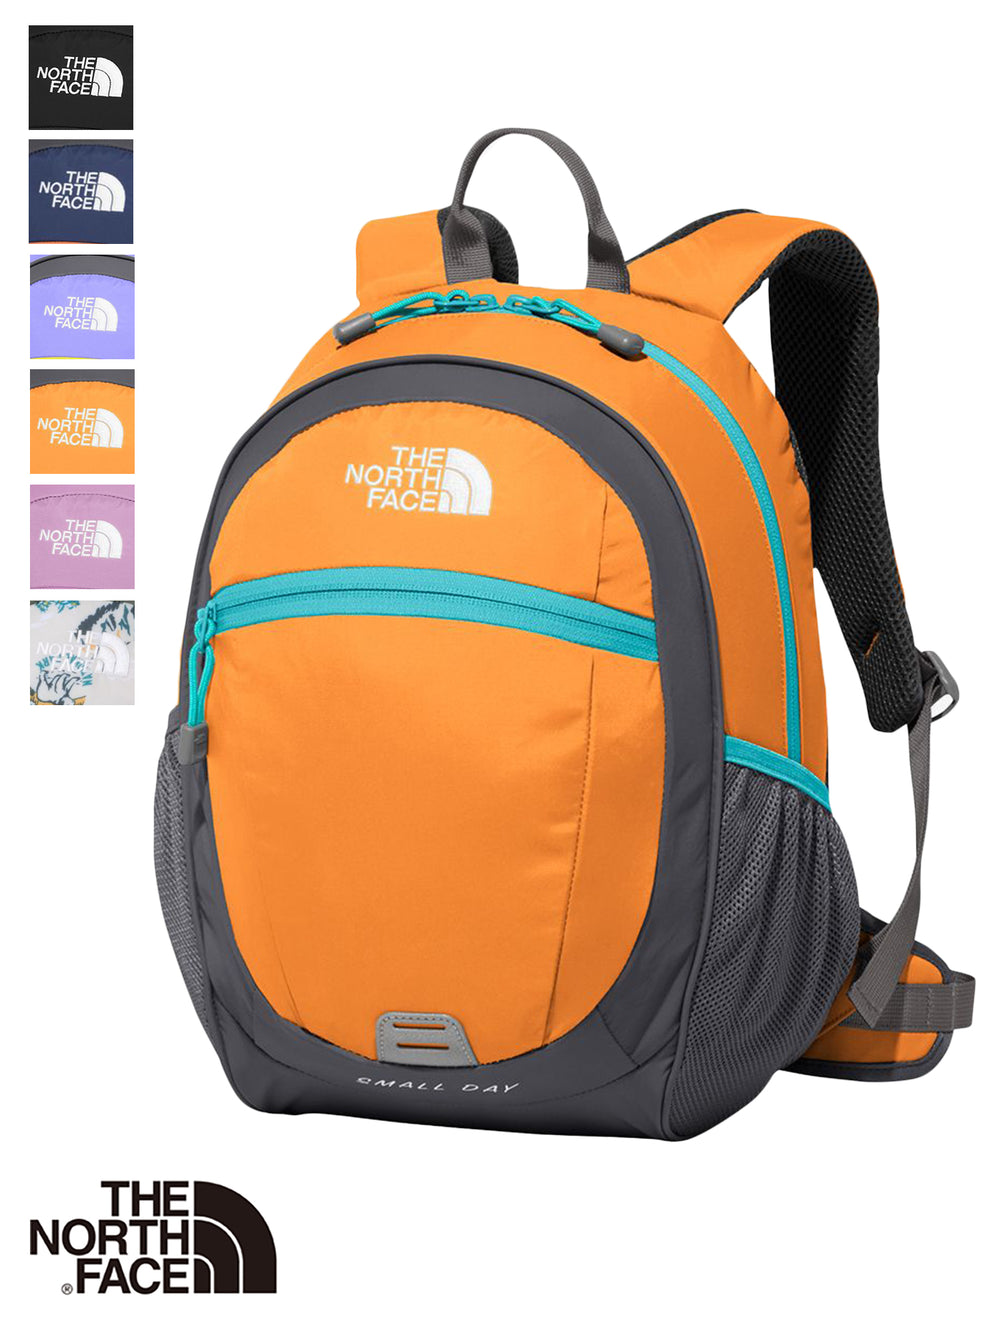 [Sold Out No Restock][THE NORTH FACE] Kids Small Day Backpack The North Face Kids Outdoor Kids Rucksack Cute 23SS NMJ72312